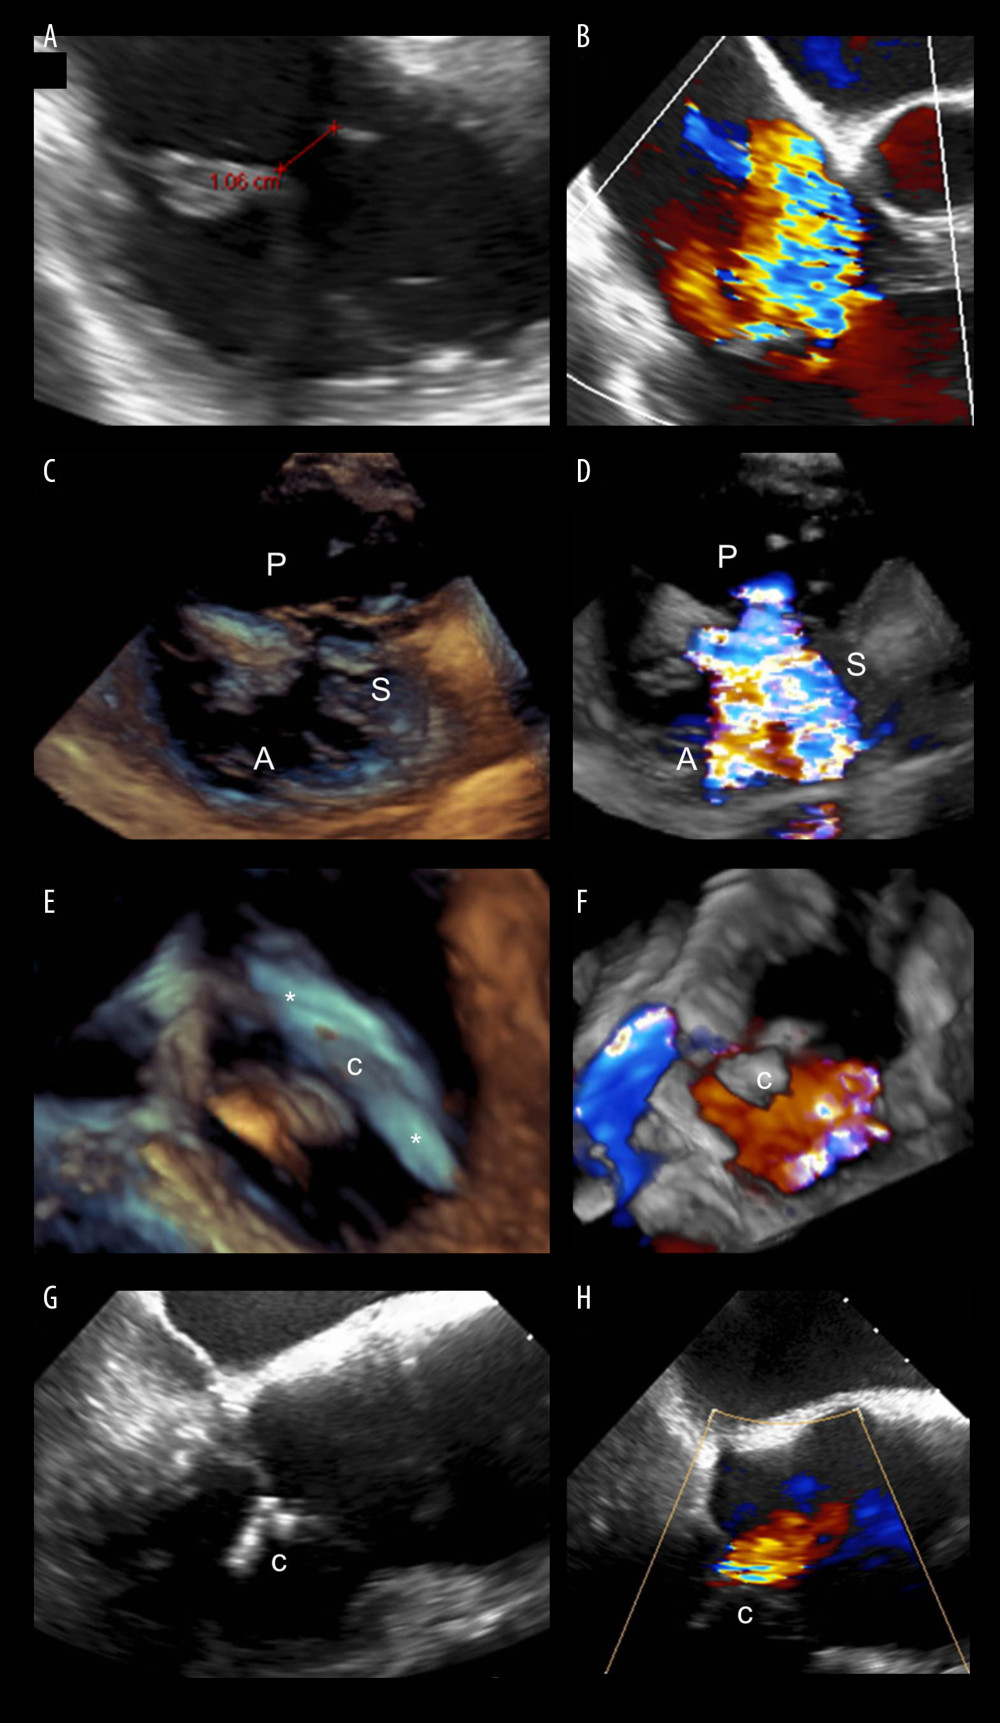 Intraprocedural images of the percutaneous edge-to-edge tricuspid valve repair employing the MitraClip XTR system by transesophageal echocardiography (TEE). (A–D) TEE revealed severe tricuspid valve regurgitation between the anterior and the septal and the posterior and the septal leaflet, coaptation gap size 10.6 mm (A: Mid-esophageal 4 chamber view, B: Corresponding color Doppler imaging, C: Transgastric 3D imaging of tricuspid valve, D: Corresponding color Doppler imaging visualizing origin of TR). (E, F) TEE-view for correct clip rotation of the MitraClip XTR system (E: 3D imaging of clip for correct rotation. F: Corresponding color Doppler imaging, (G, H), After implantation of 2 XTR clips, we achieved significant reduction of TR, with a mild-to-moderate residual TR, Pmean 3 mmHg (G: Mid-esophageal 4 chamber view with XTR clips in final position, H: Corresponding color Doppler imaging). TR – tricuspid regurgitation; S – septal leaflet; A - anterior leaflet; P – posterior leaflet; c – clip, * clip arms.